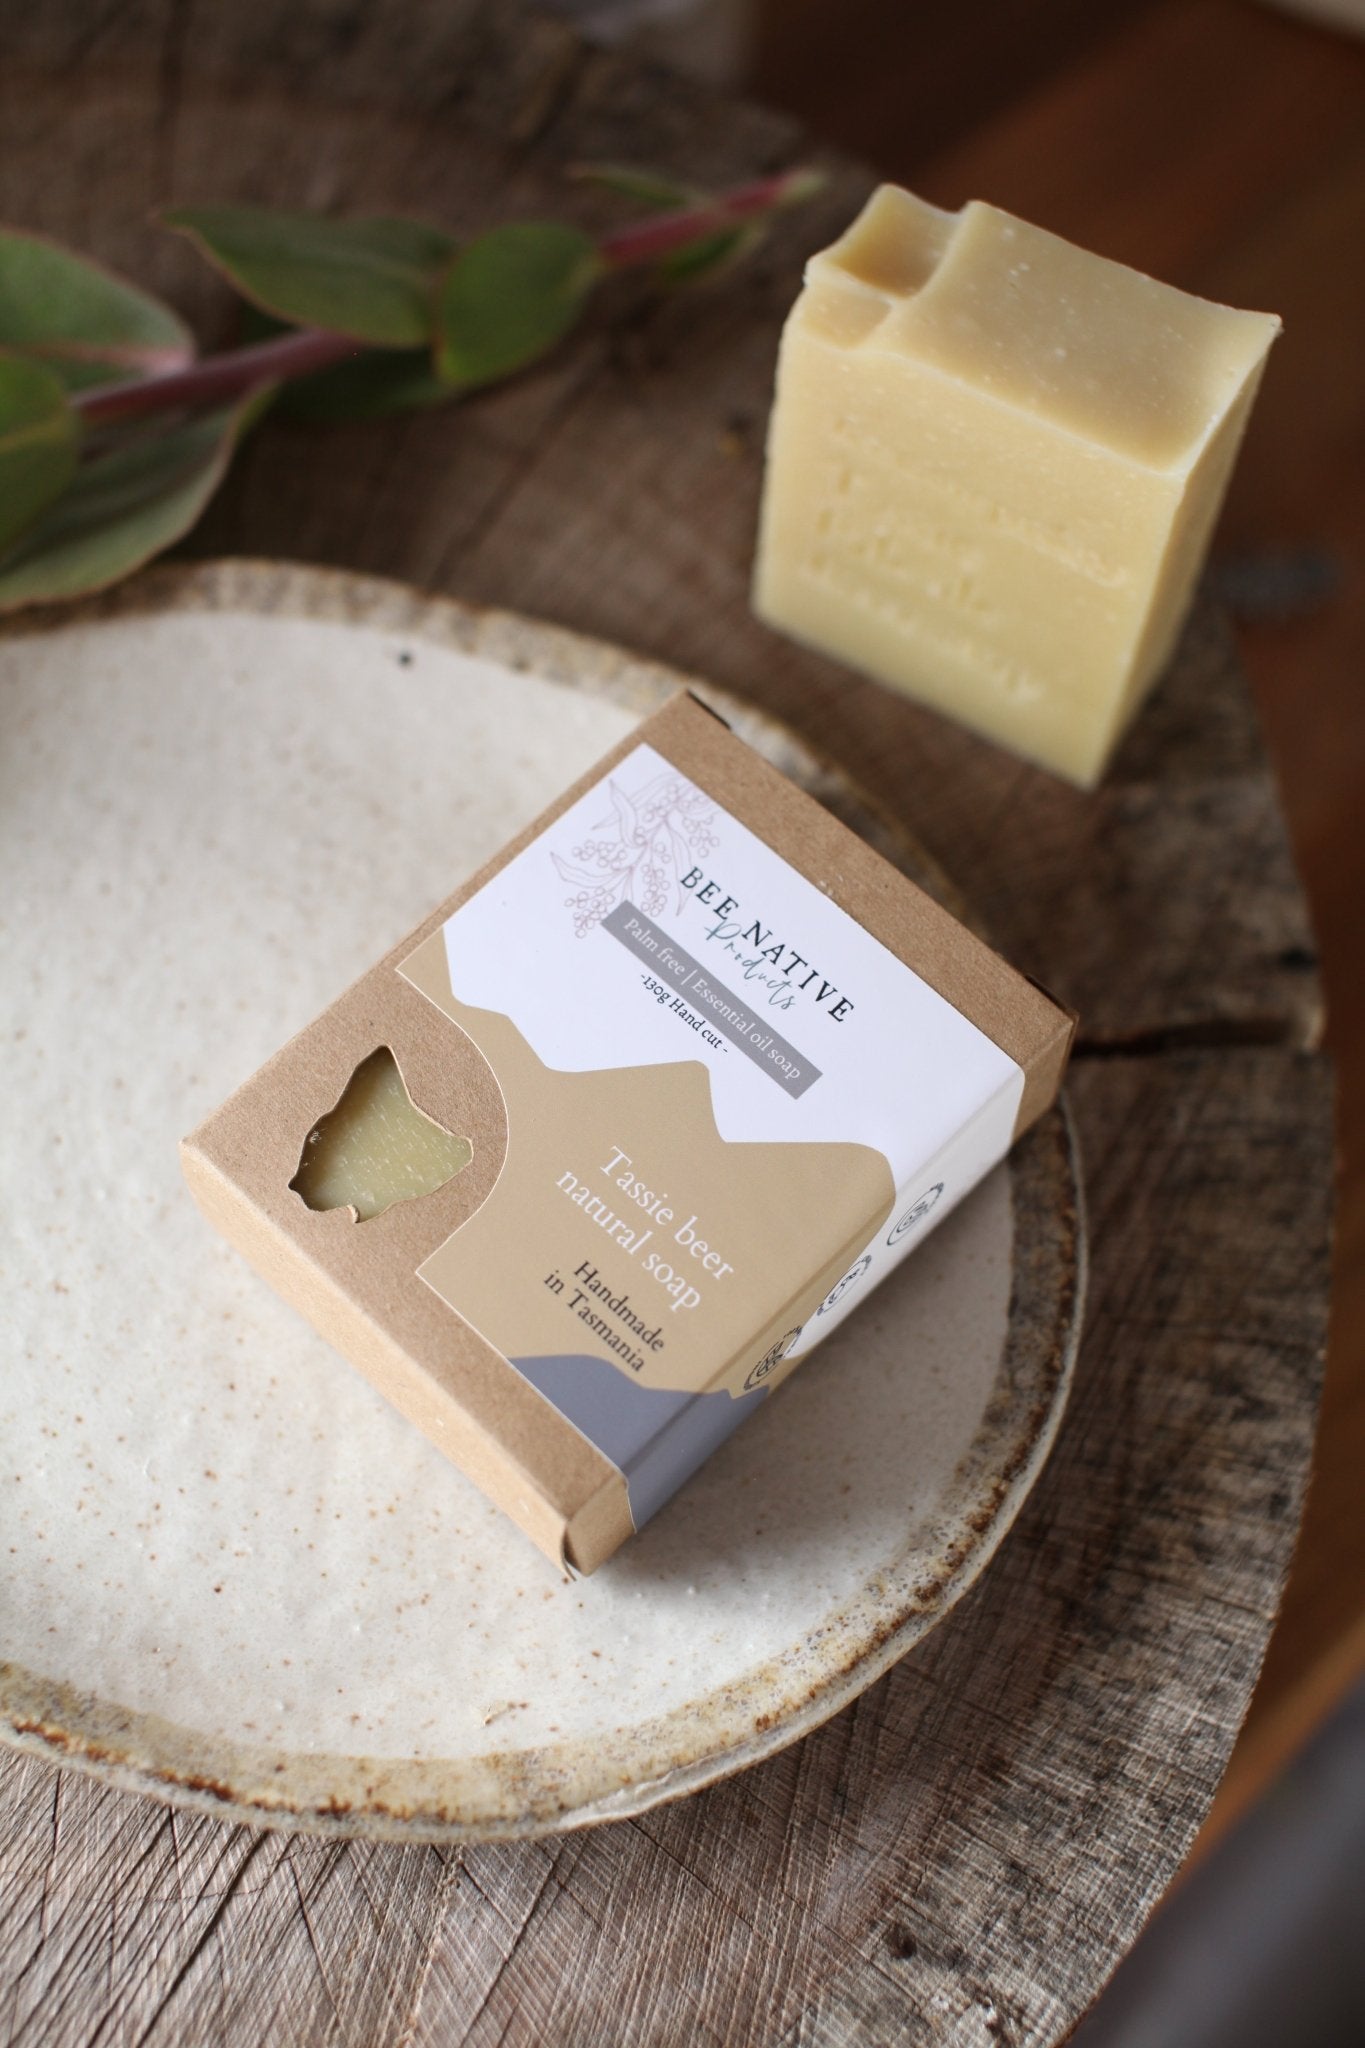 Tassie beer soap bar - Bee native products